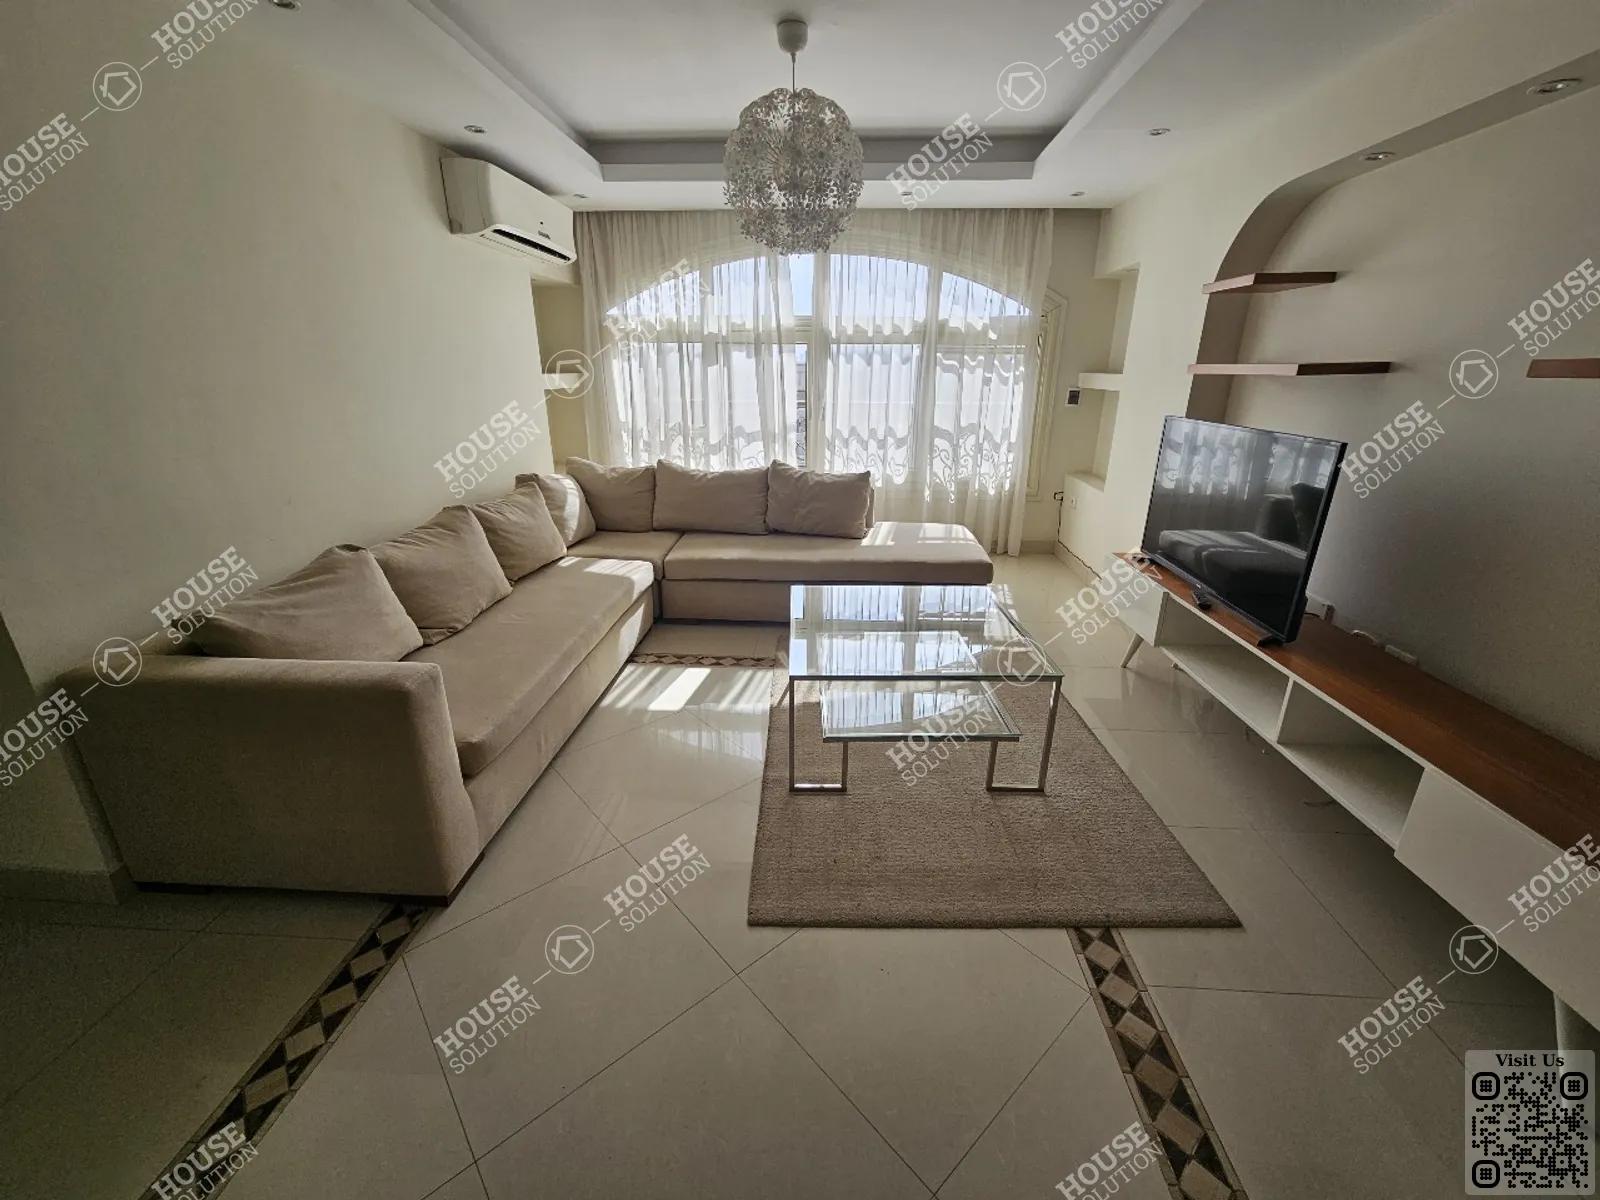 LIVING AREA  @ Apartments For Rent In Maadi Maadi Sarayat Area: 320 m² consists of 4 Bedrooms 4 Bathrooms Modern furnished 5 stars #5796-2